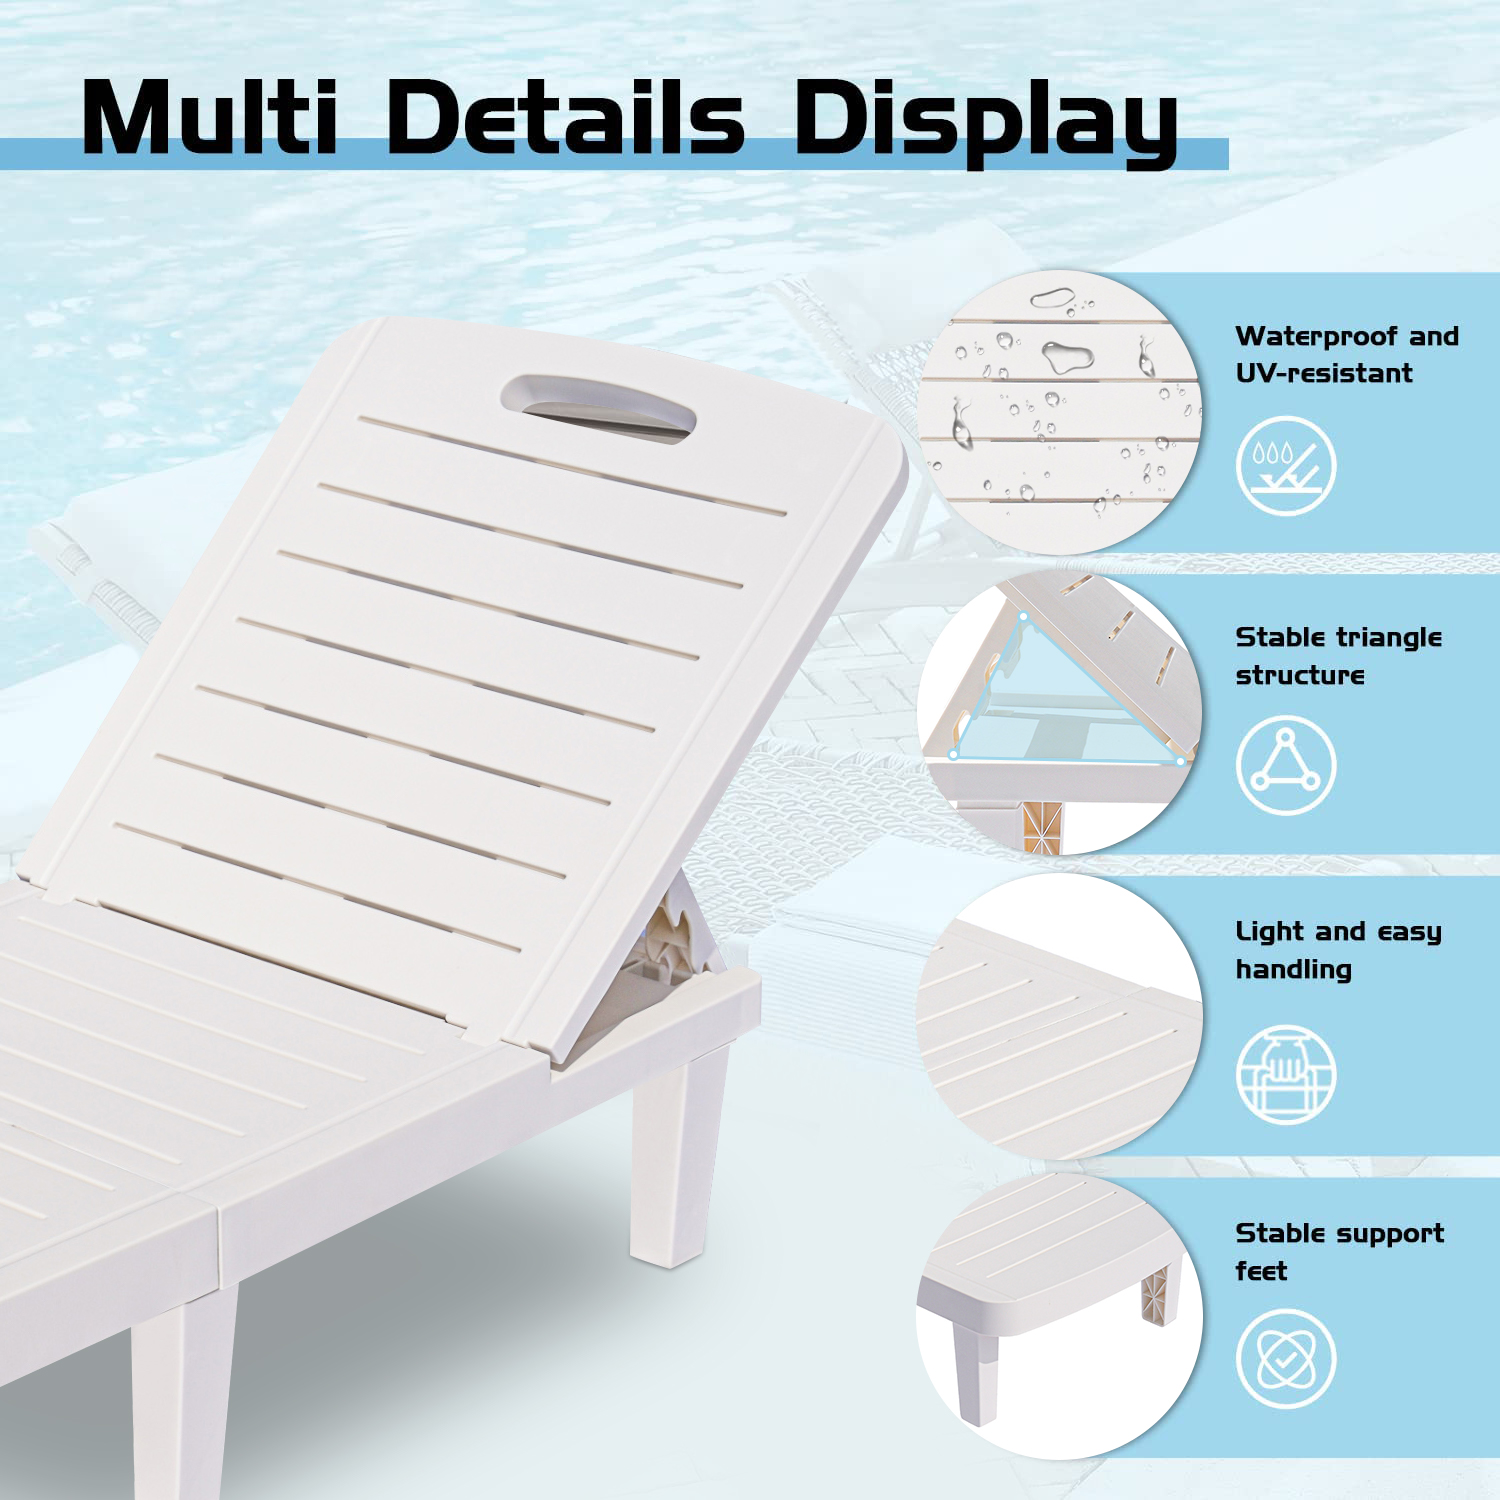 Chaise Lounge for Beach, Patio Furniture Single Outdoor Chaise Lounge Chair with Adjustable Backrest/Retractable Tray, Plastic Reclining Lounge Chair for Backyard, Porch, Pool, Max Holds 330LBS, L4555 - image 5 of 9